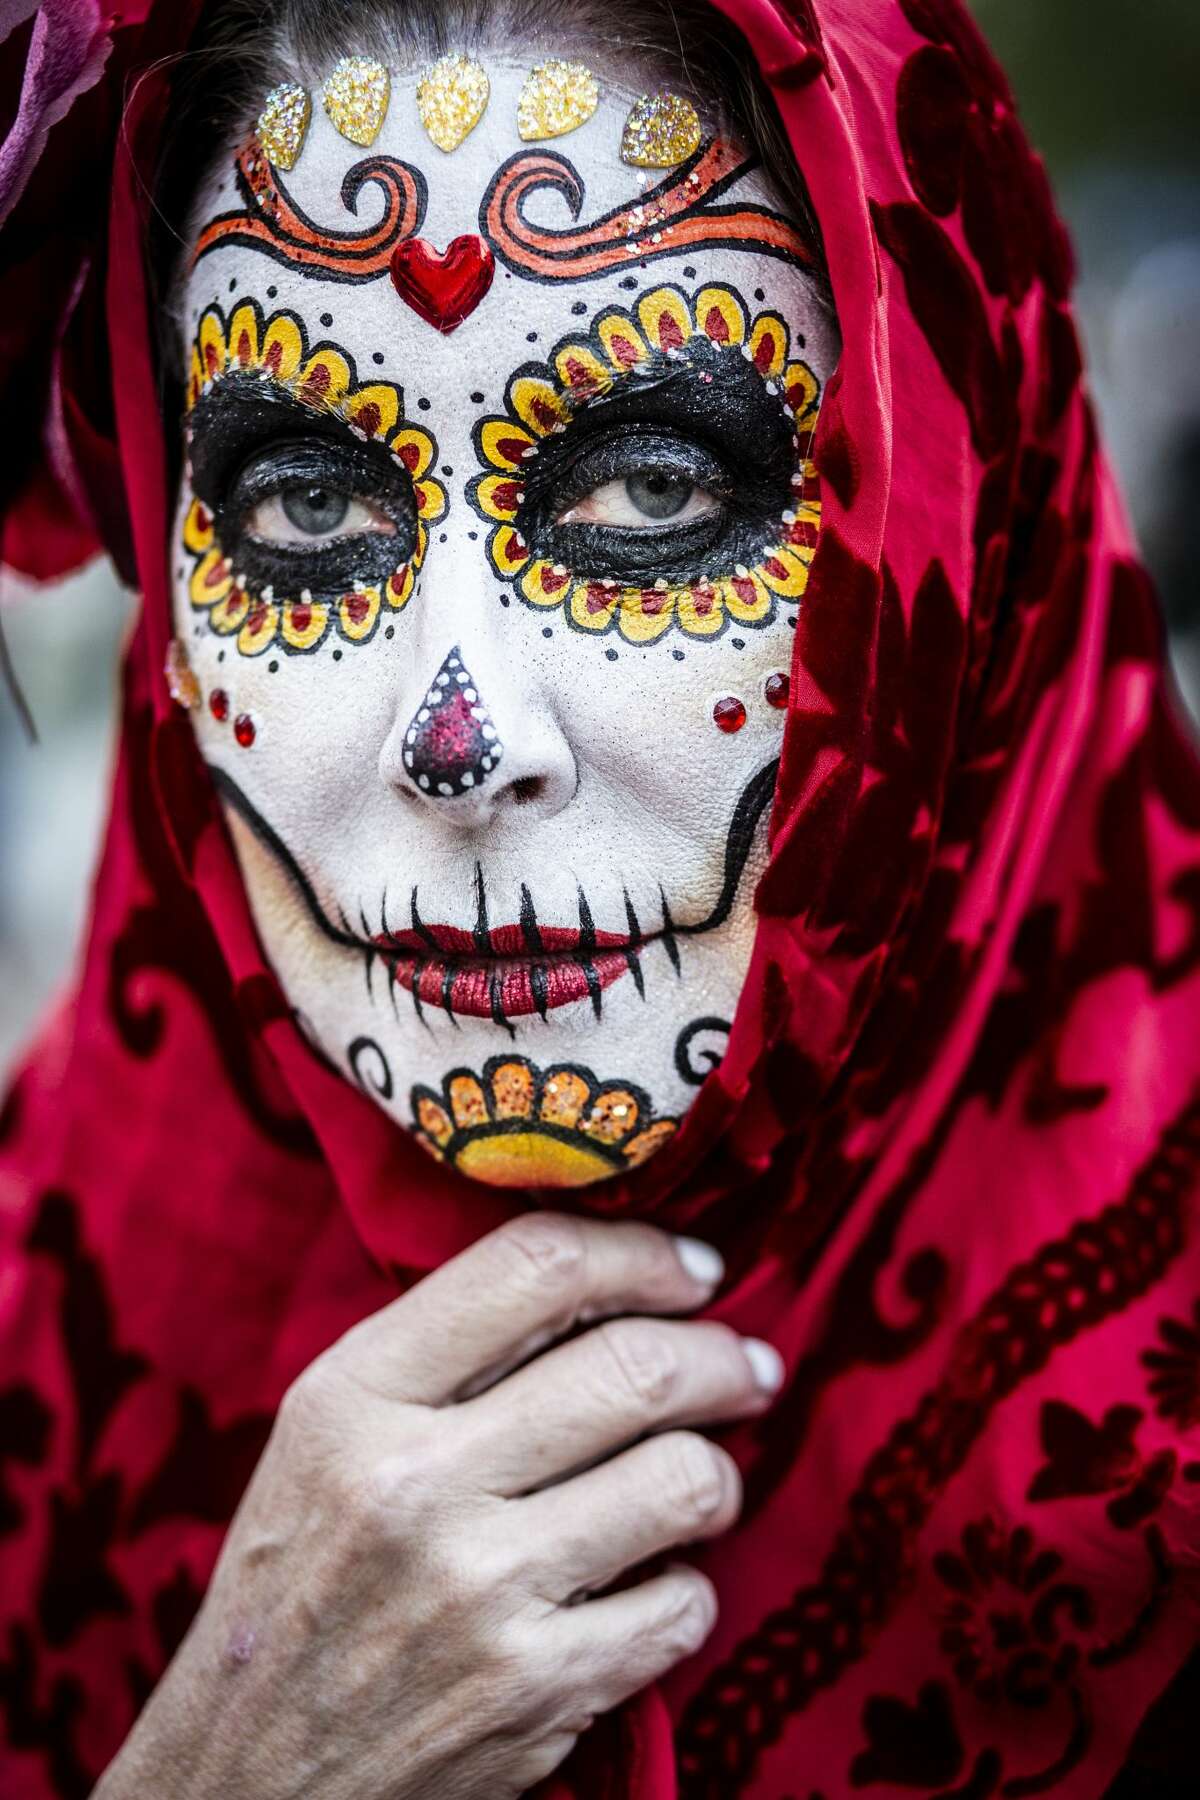 There will be a muertos-themed 5K run and walk allowing participants to run through a local cemetery Celebrating Life Run-Walk 5K is part of the event lineup for the inaugural Day of the Dead San Antonio festival. On Nov. 2, runners will dash through Mission Park Cemetery at 1700 S.E. Military Drive. 